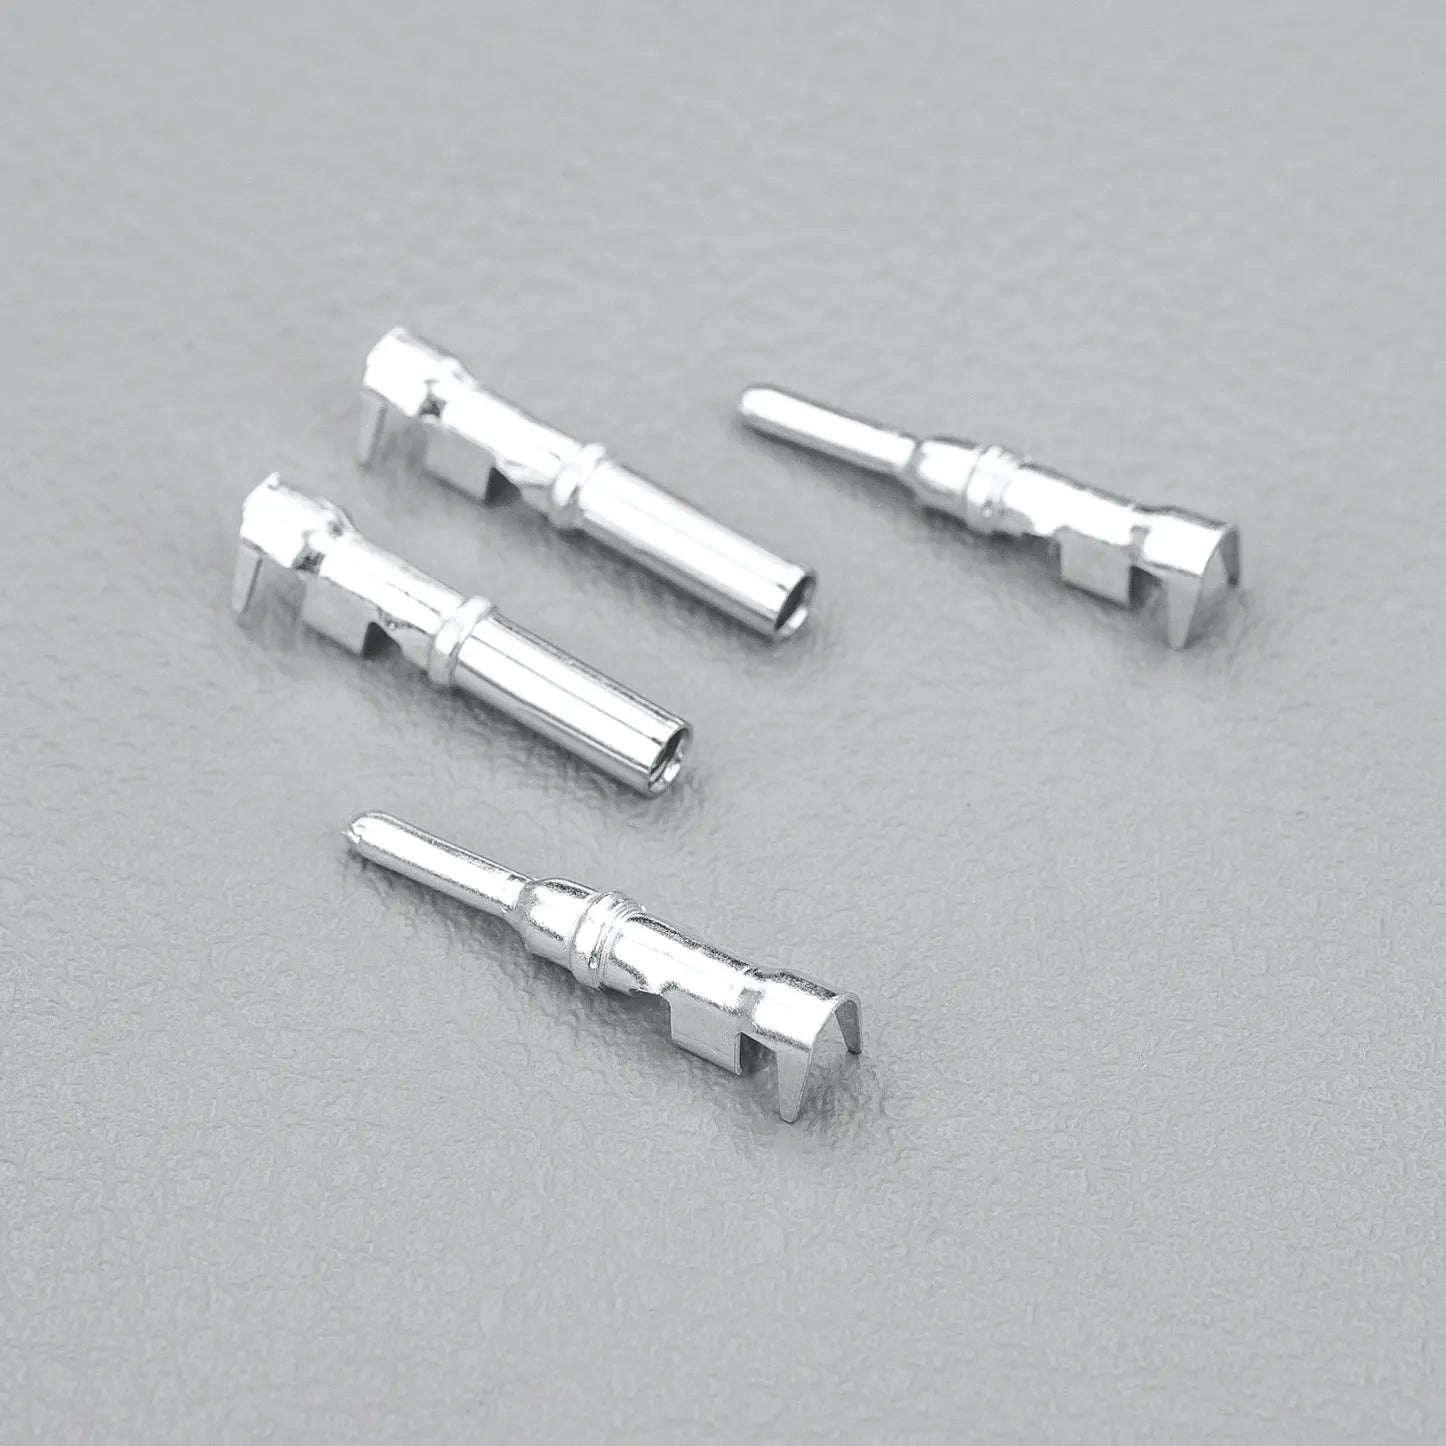 STEDI connector "DT&amp;DT-P" 2 PIN (Male&amp;Female)